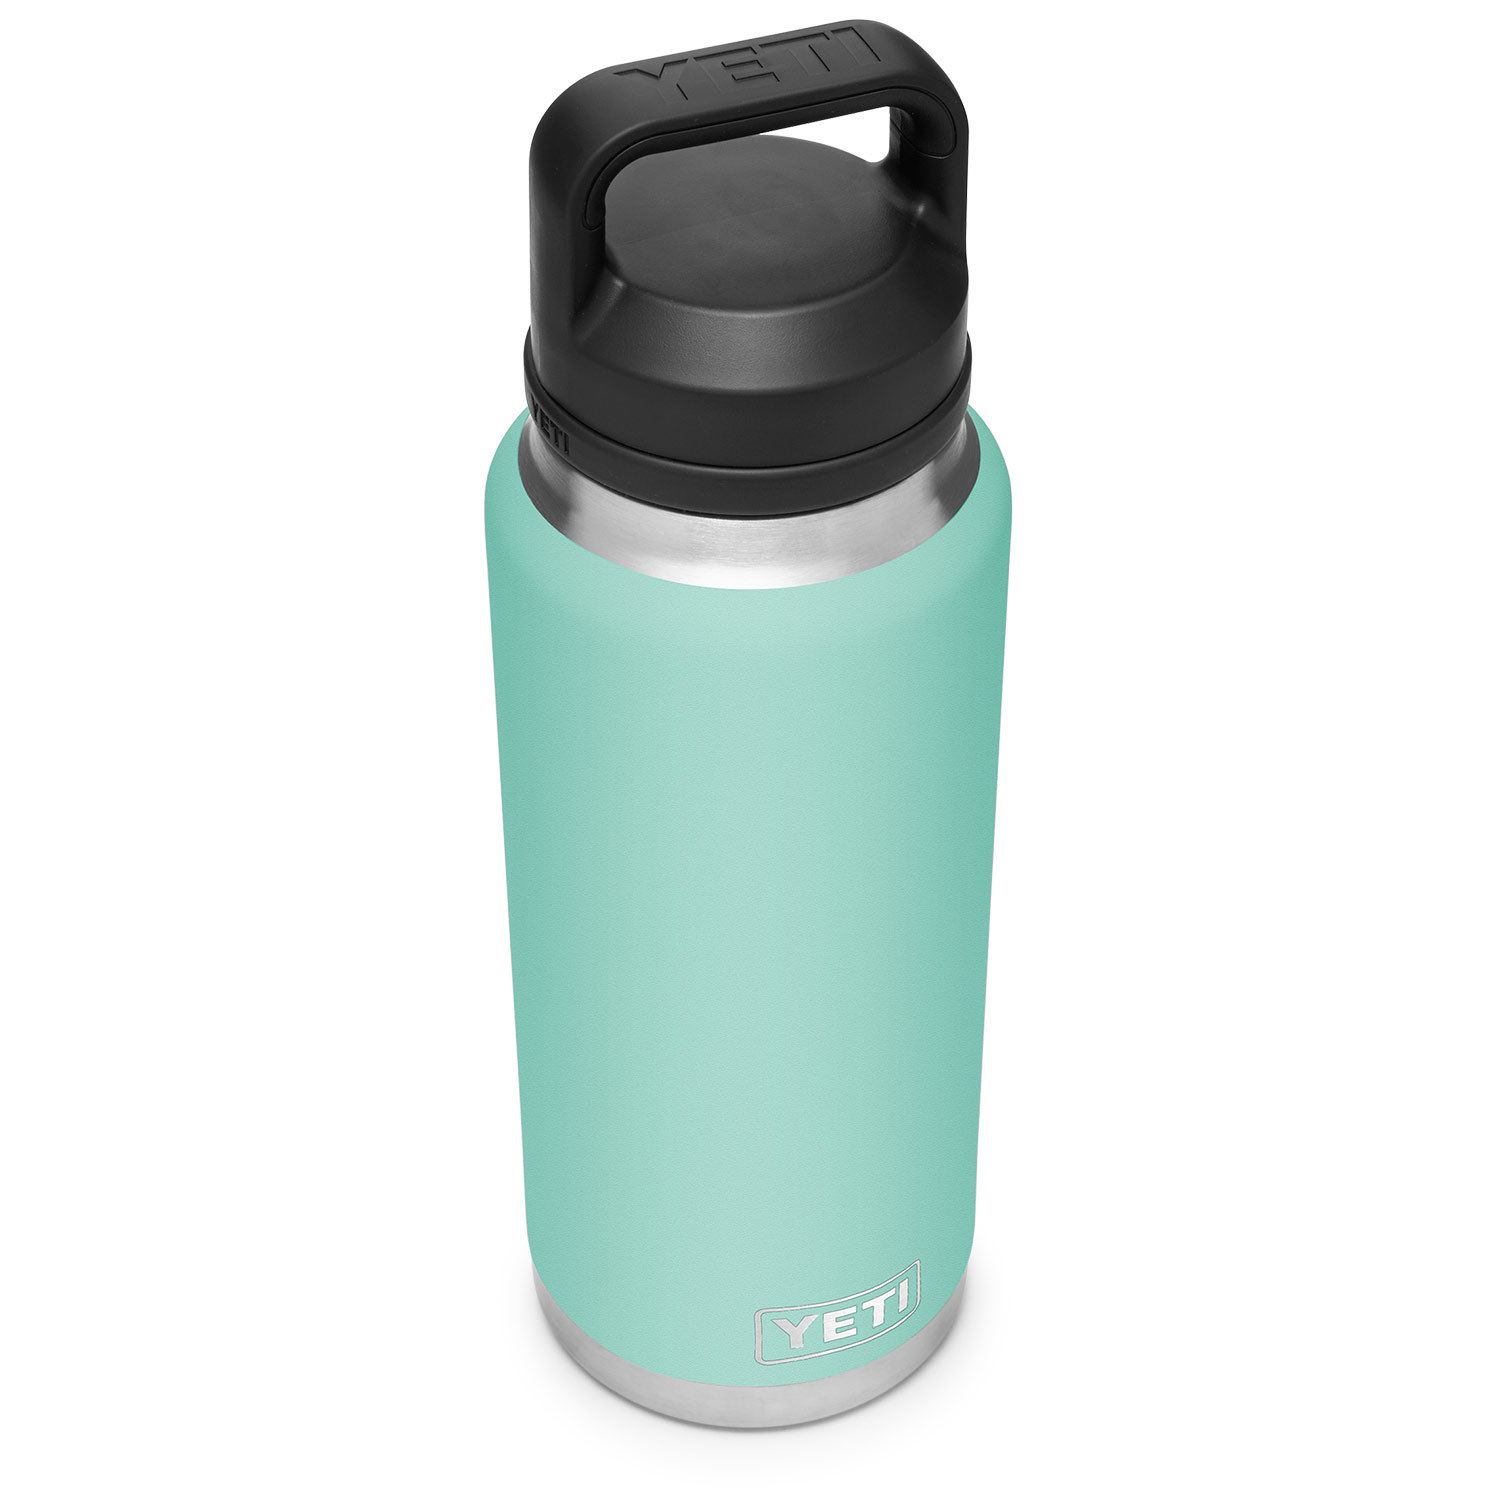 YETI Rambler 36 oz Bottle, Stainless Steel with Chug Cap, Offshore